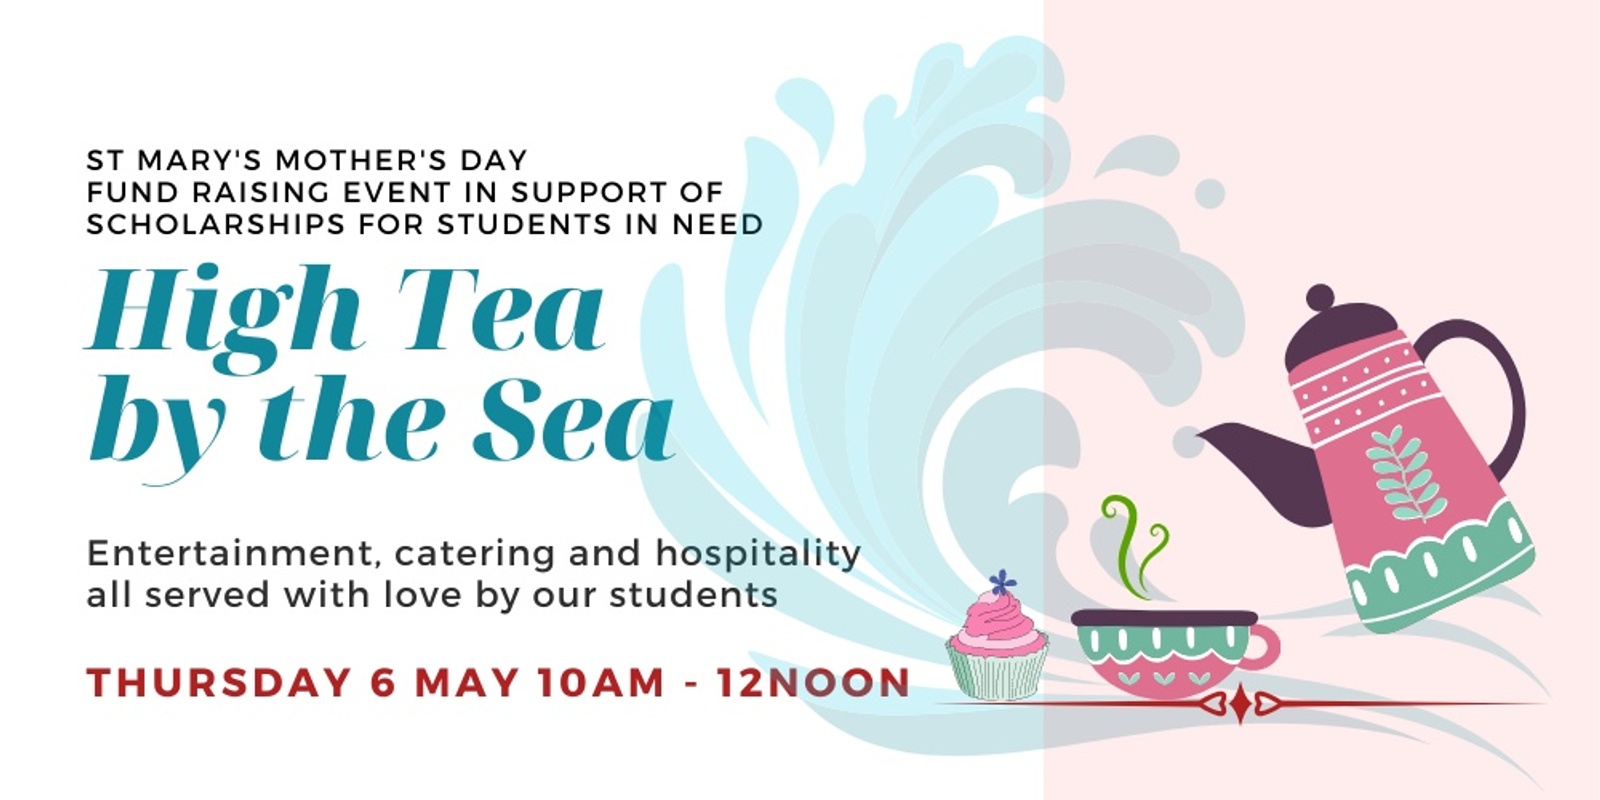 Banner image for St Mary's Mother's Day High Tea by the Sea